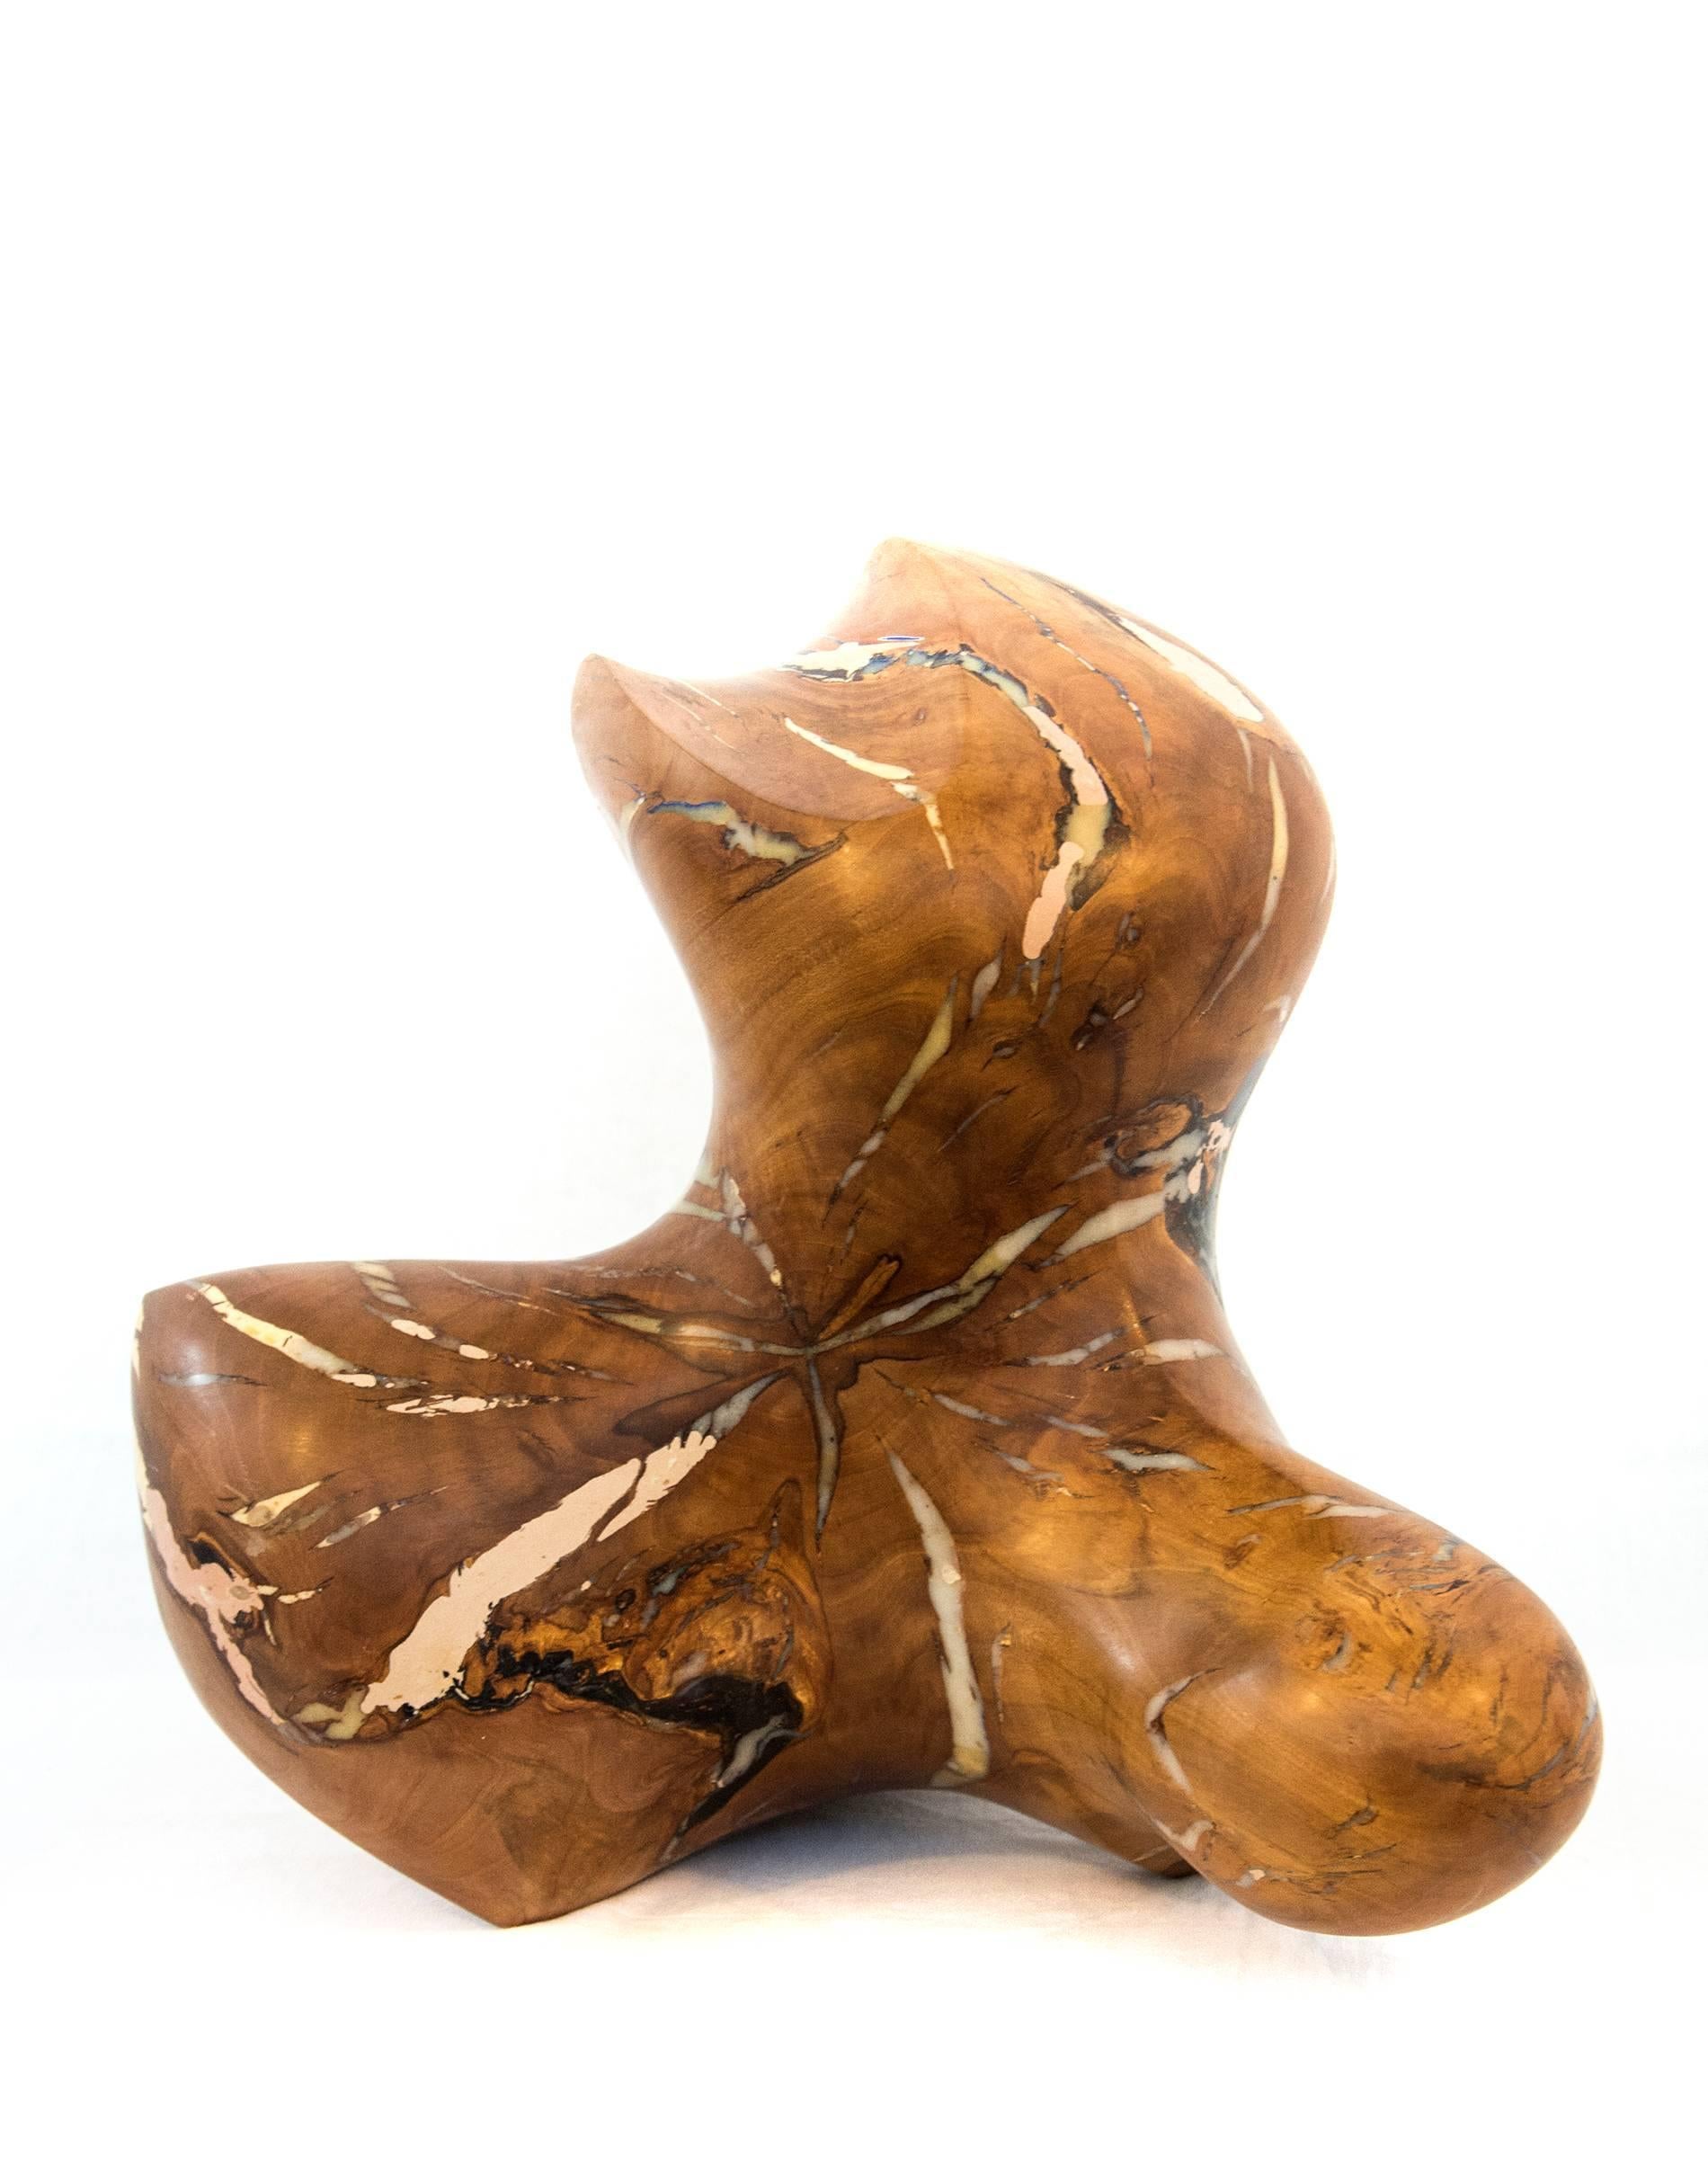 Shayne Dark Abstract Sculpture - Windfall Series No 07 - smooth, polished, natural wood abstract carved sculpture